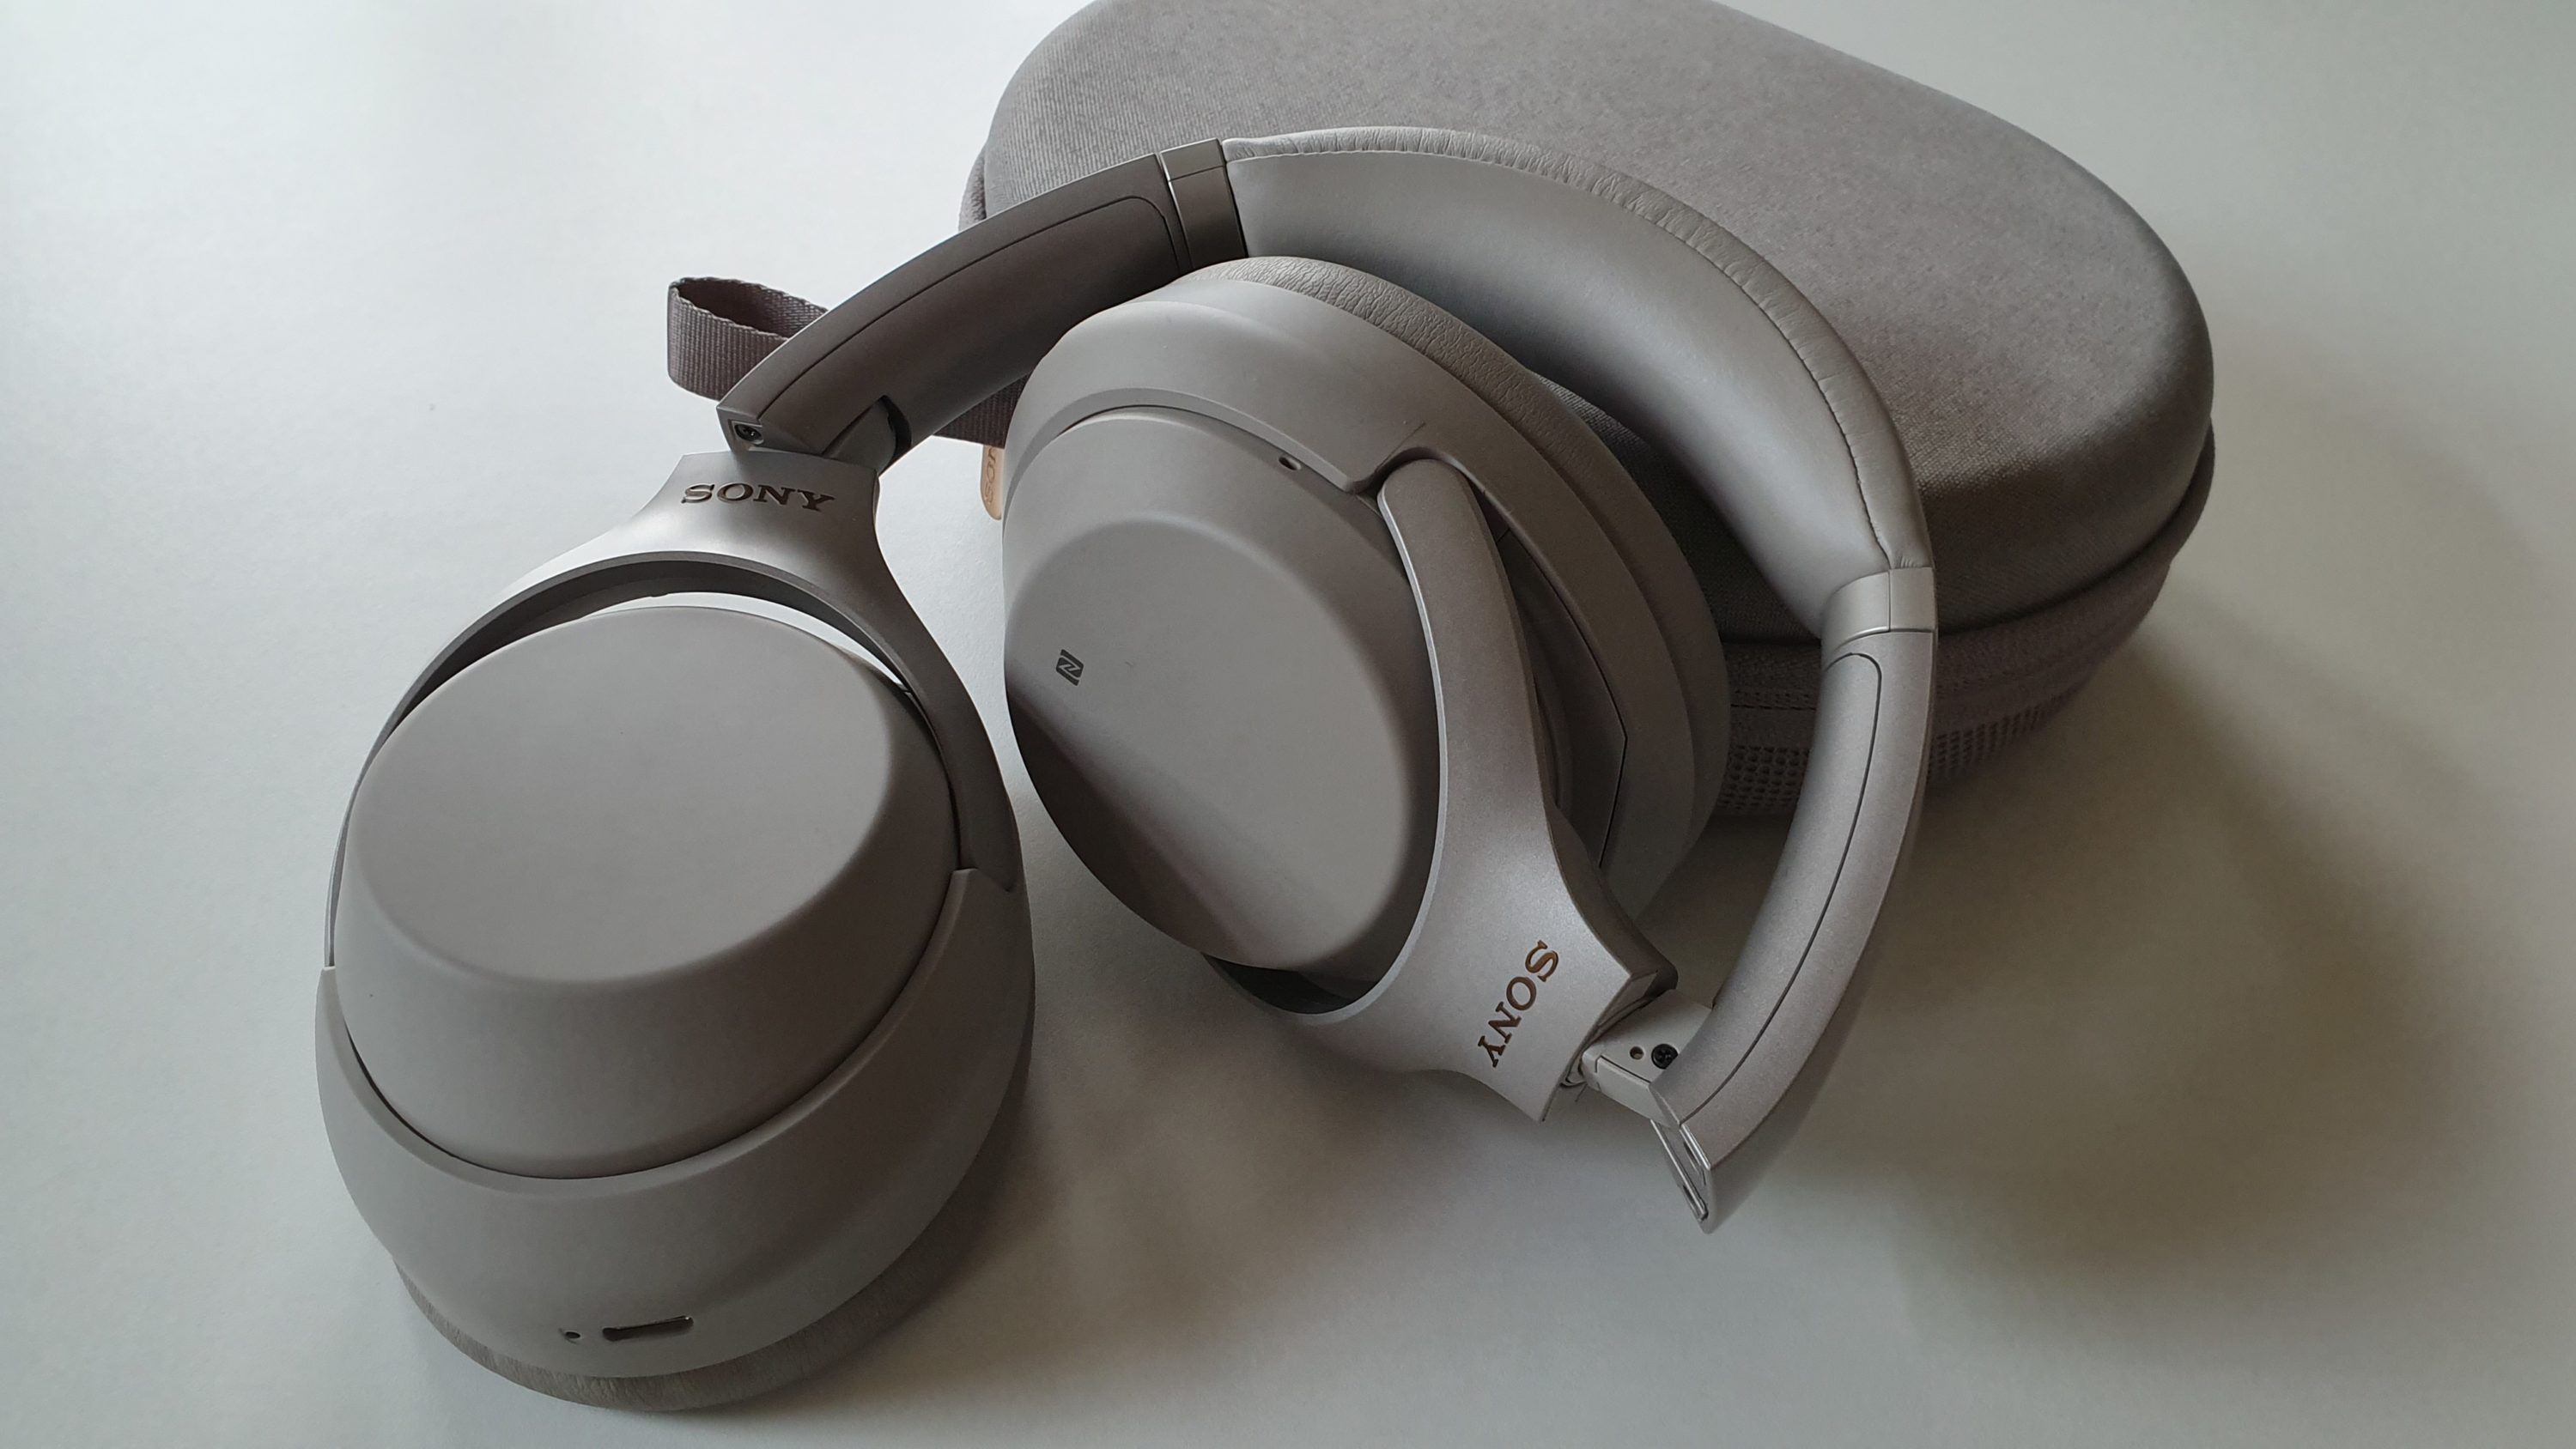 Sony WH-1000XM3: King of Noise Cancelling Headphones?